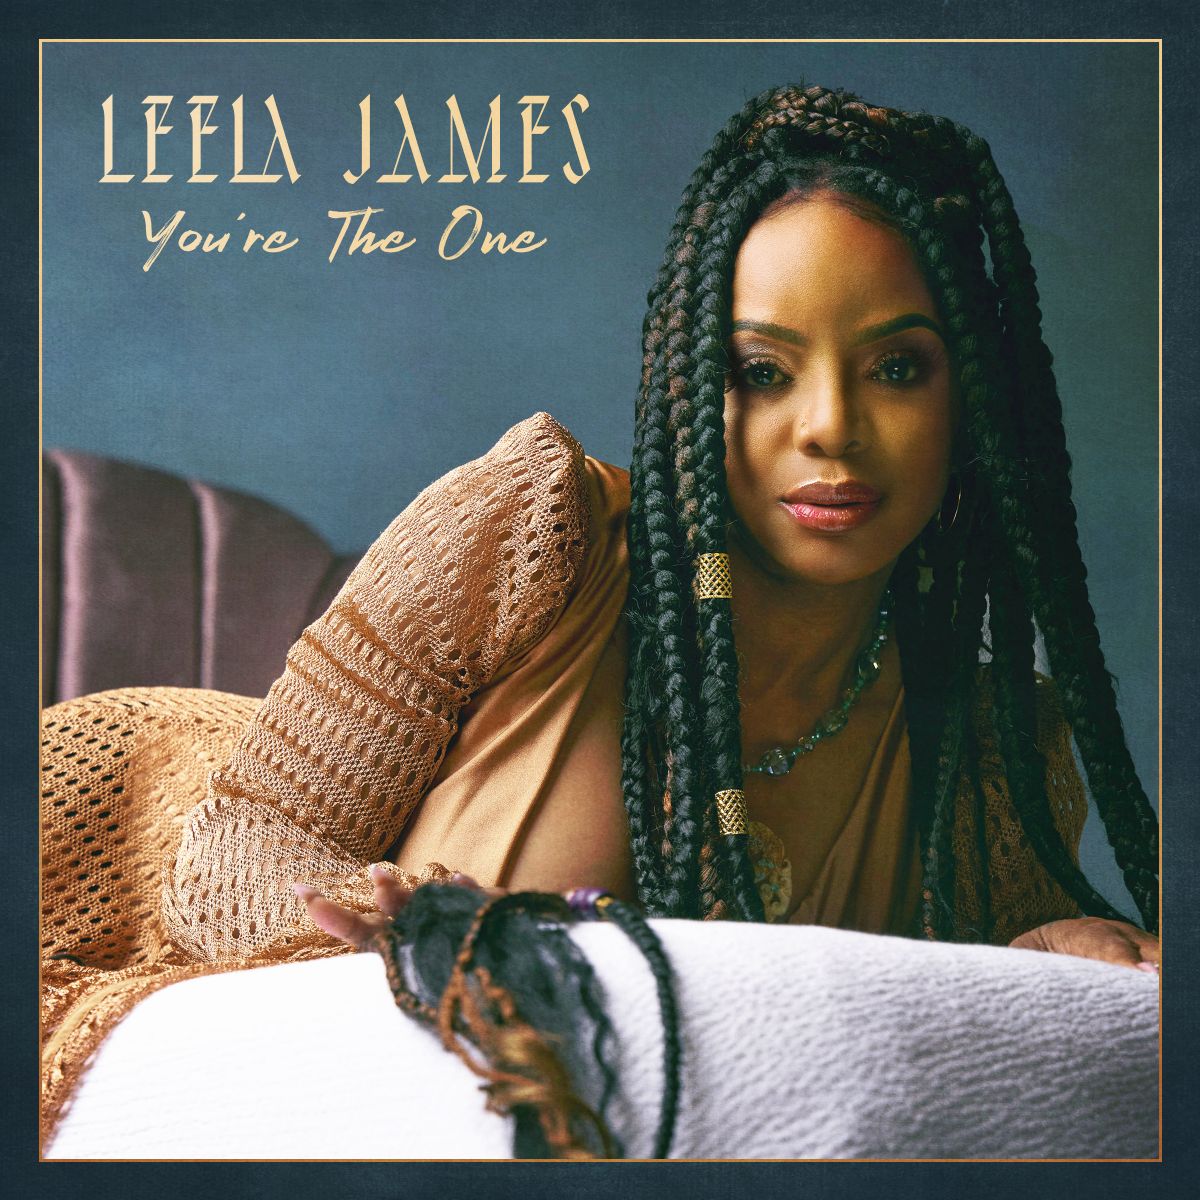 Leela James You're The One.